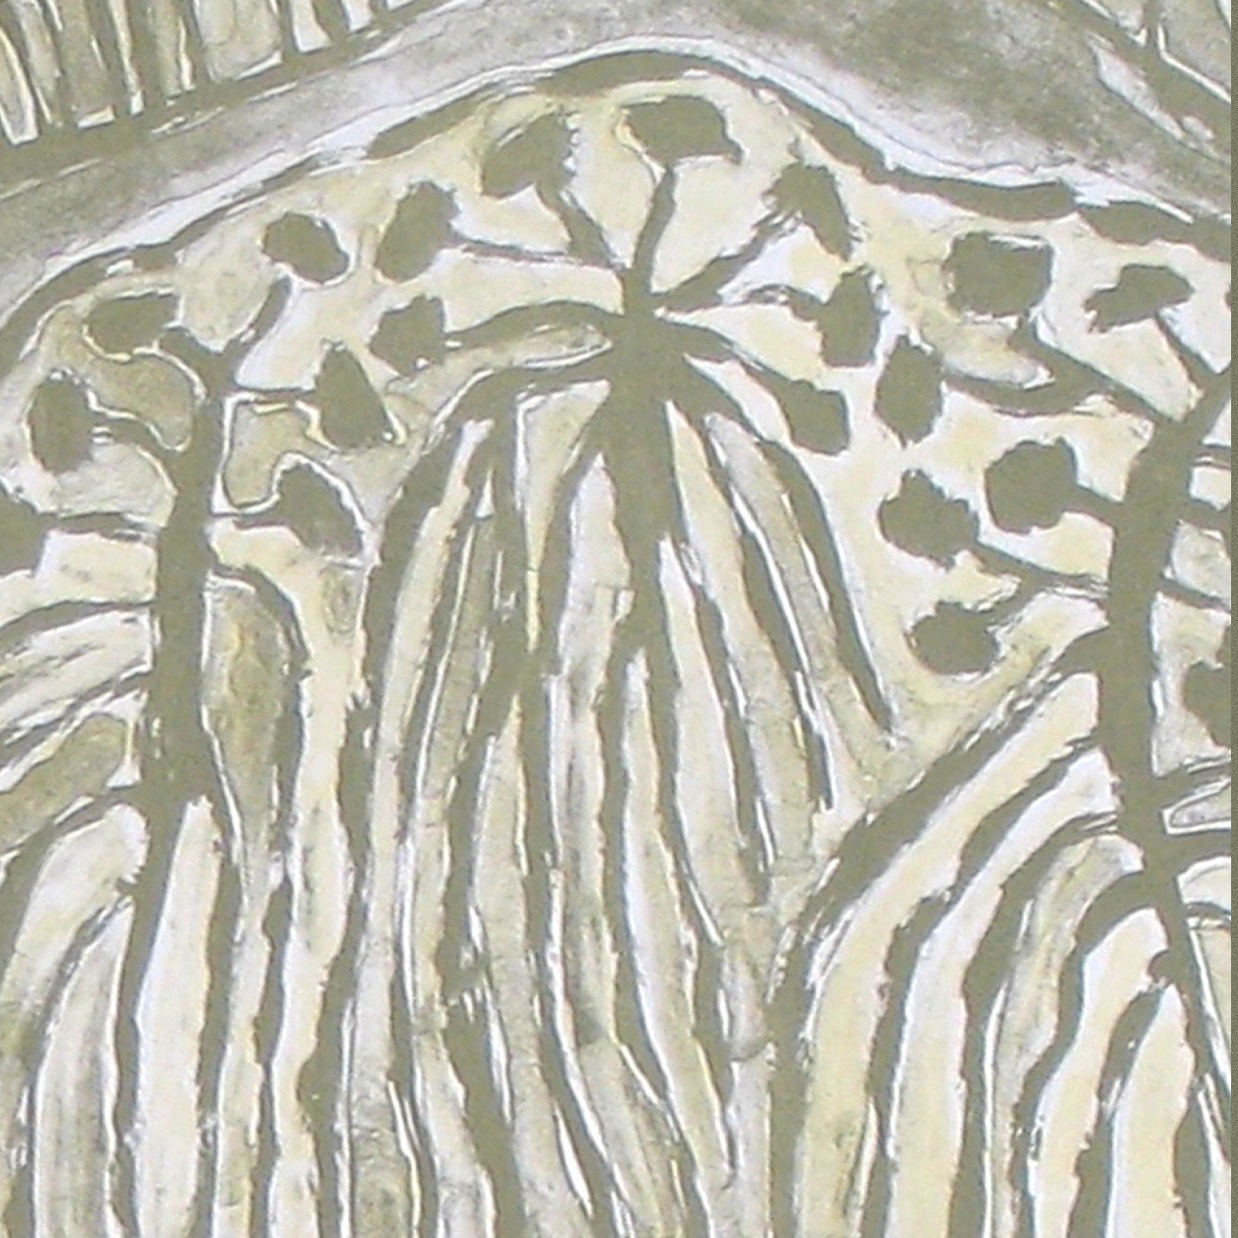 Abstract illustration of trees